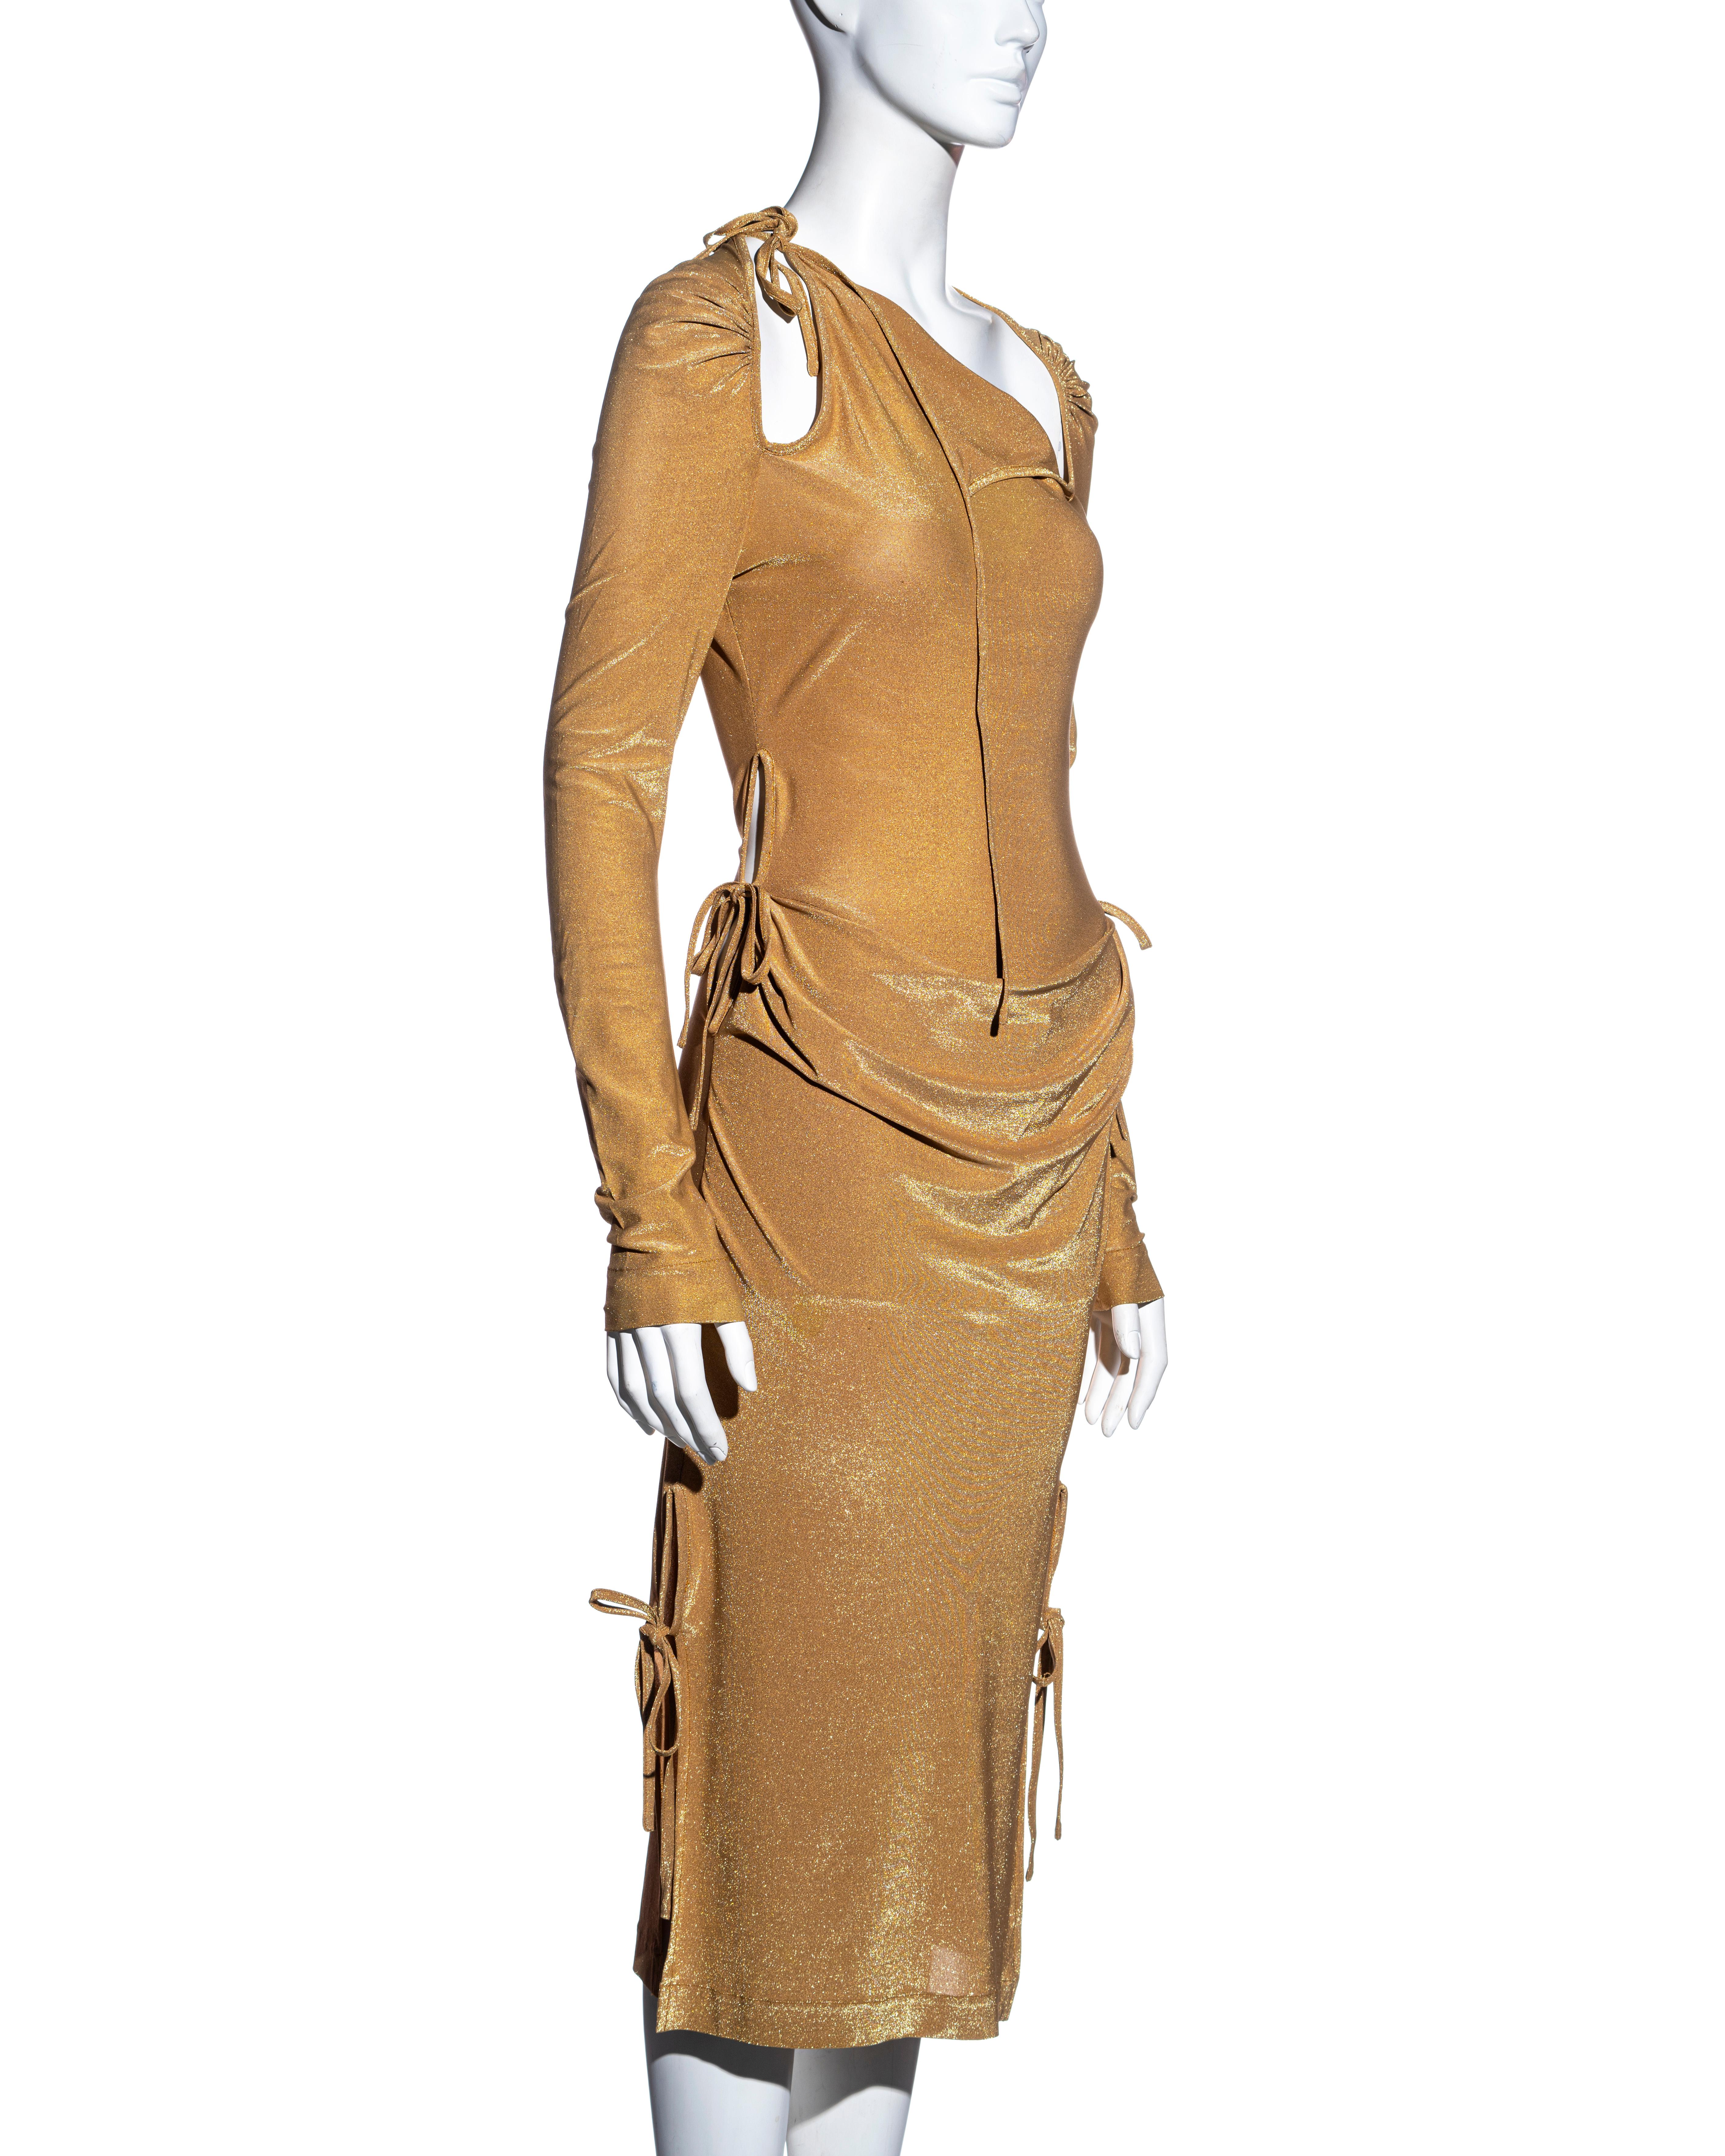 ▪ Vivienne Westwood gold stretch lurex evening dress
▪ Multiple cut-outs with tie fastenings which can be styled in various ways 
▪ Ruched detail at the stomach and shoulders
▪ Long fitted sleeves 
▪ Calf length skirt 
▪ 63% Viscose, 20% Polyester,